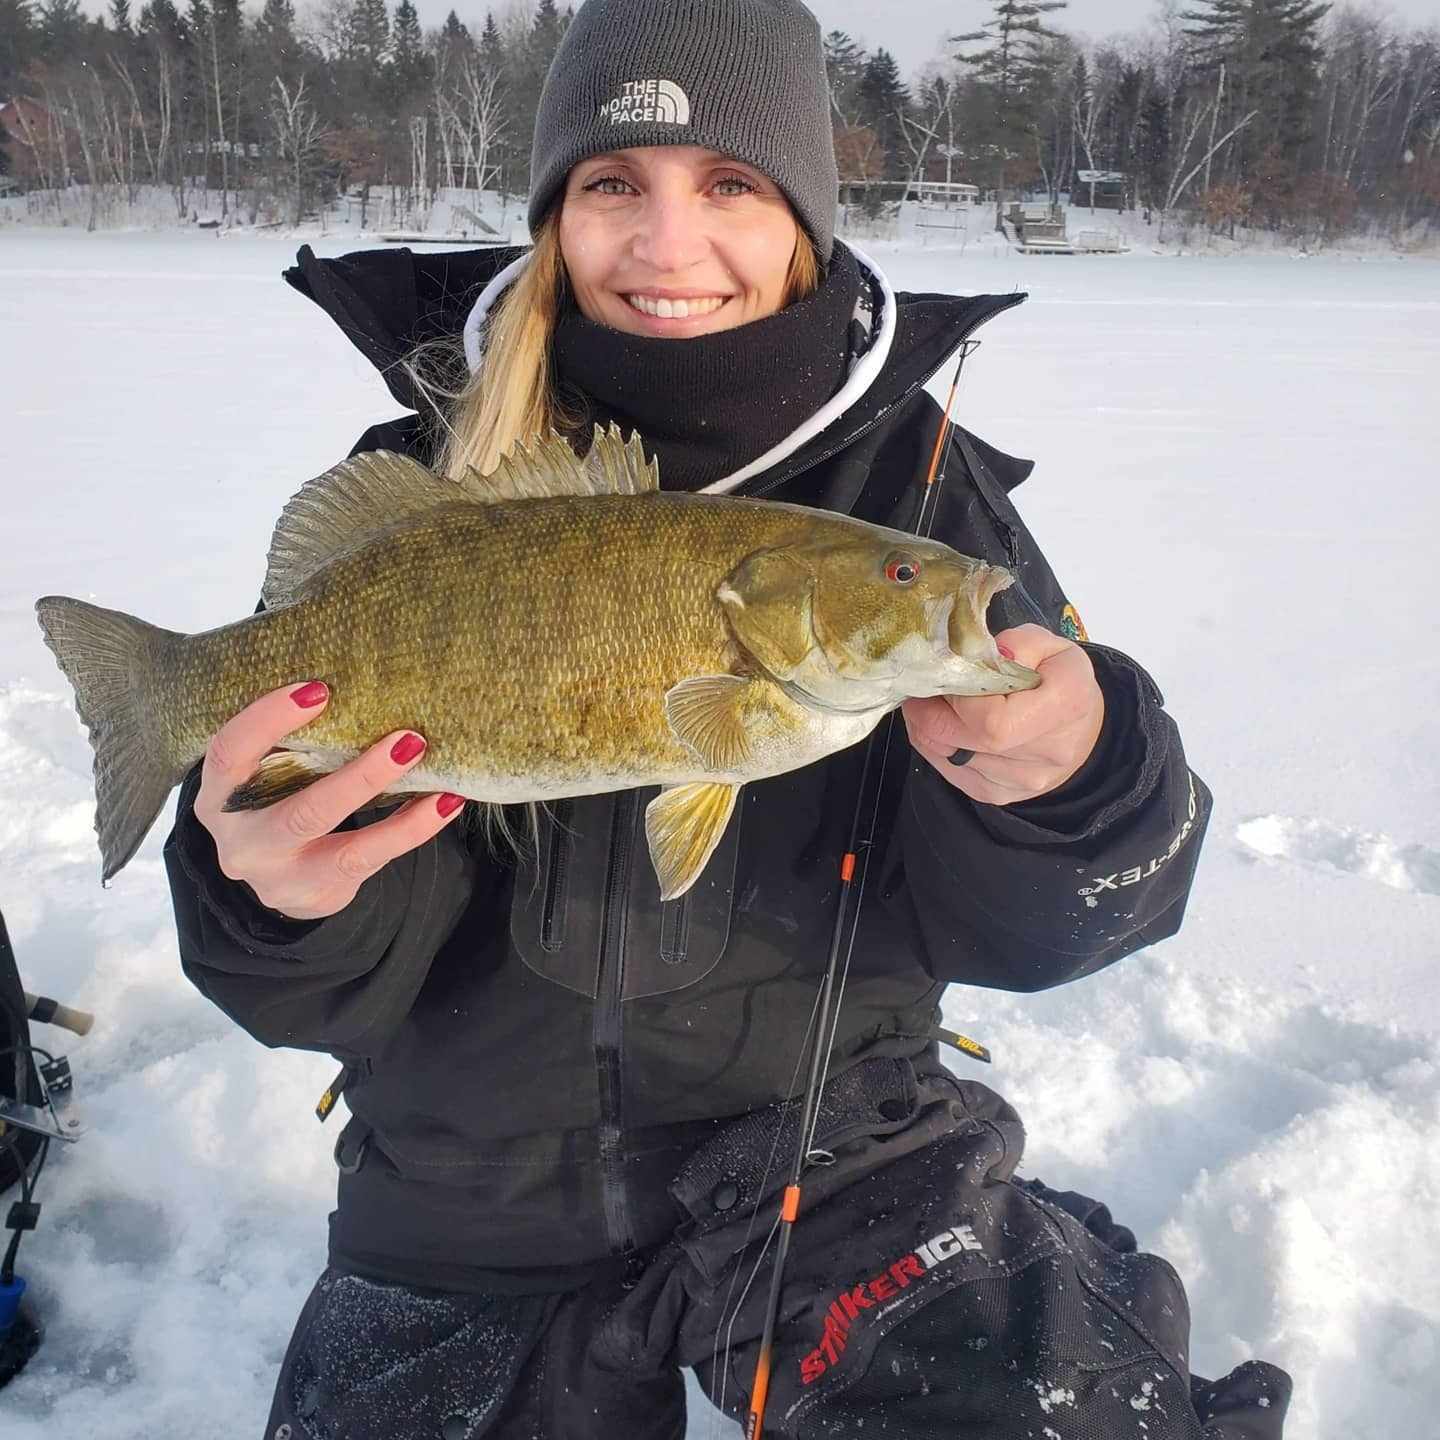 Amy Hansend holding a small mouth caught through the ice with a WST Whisker Stick